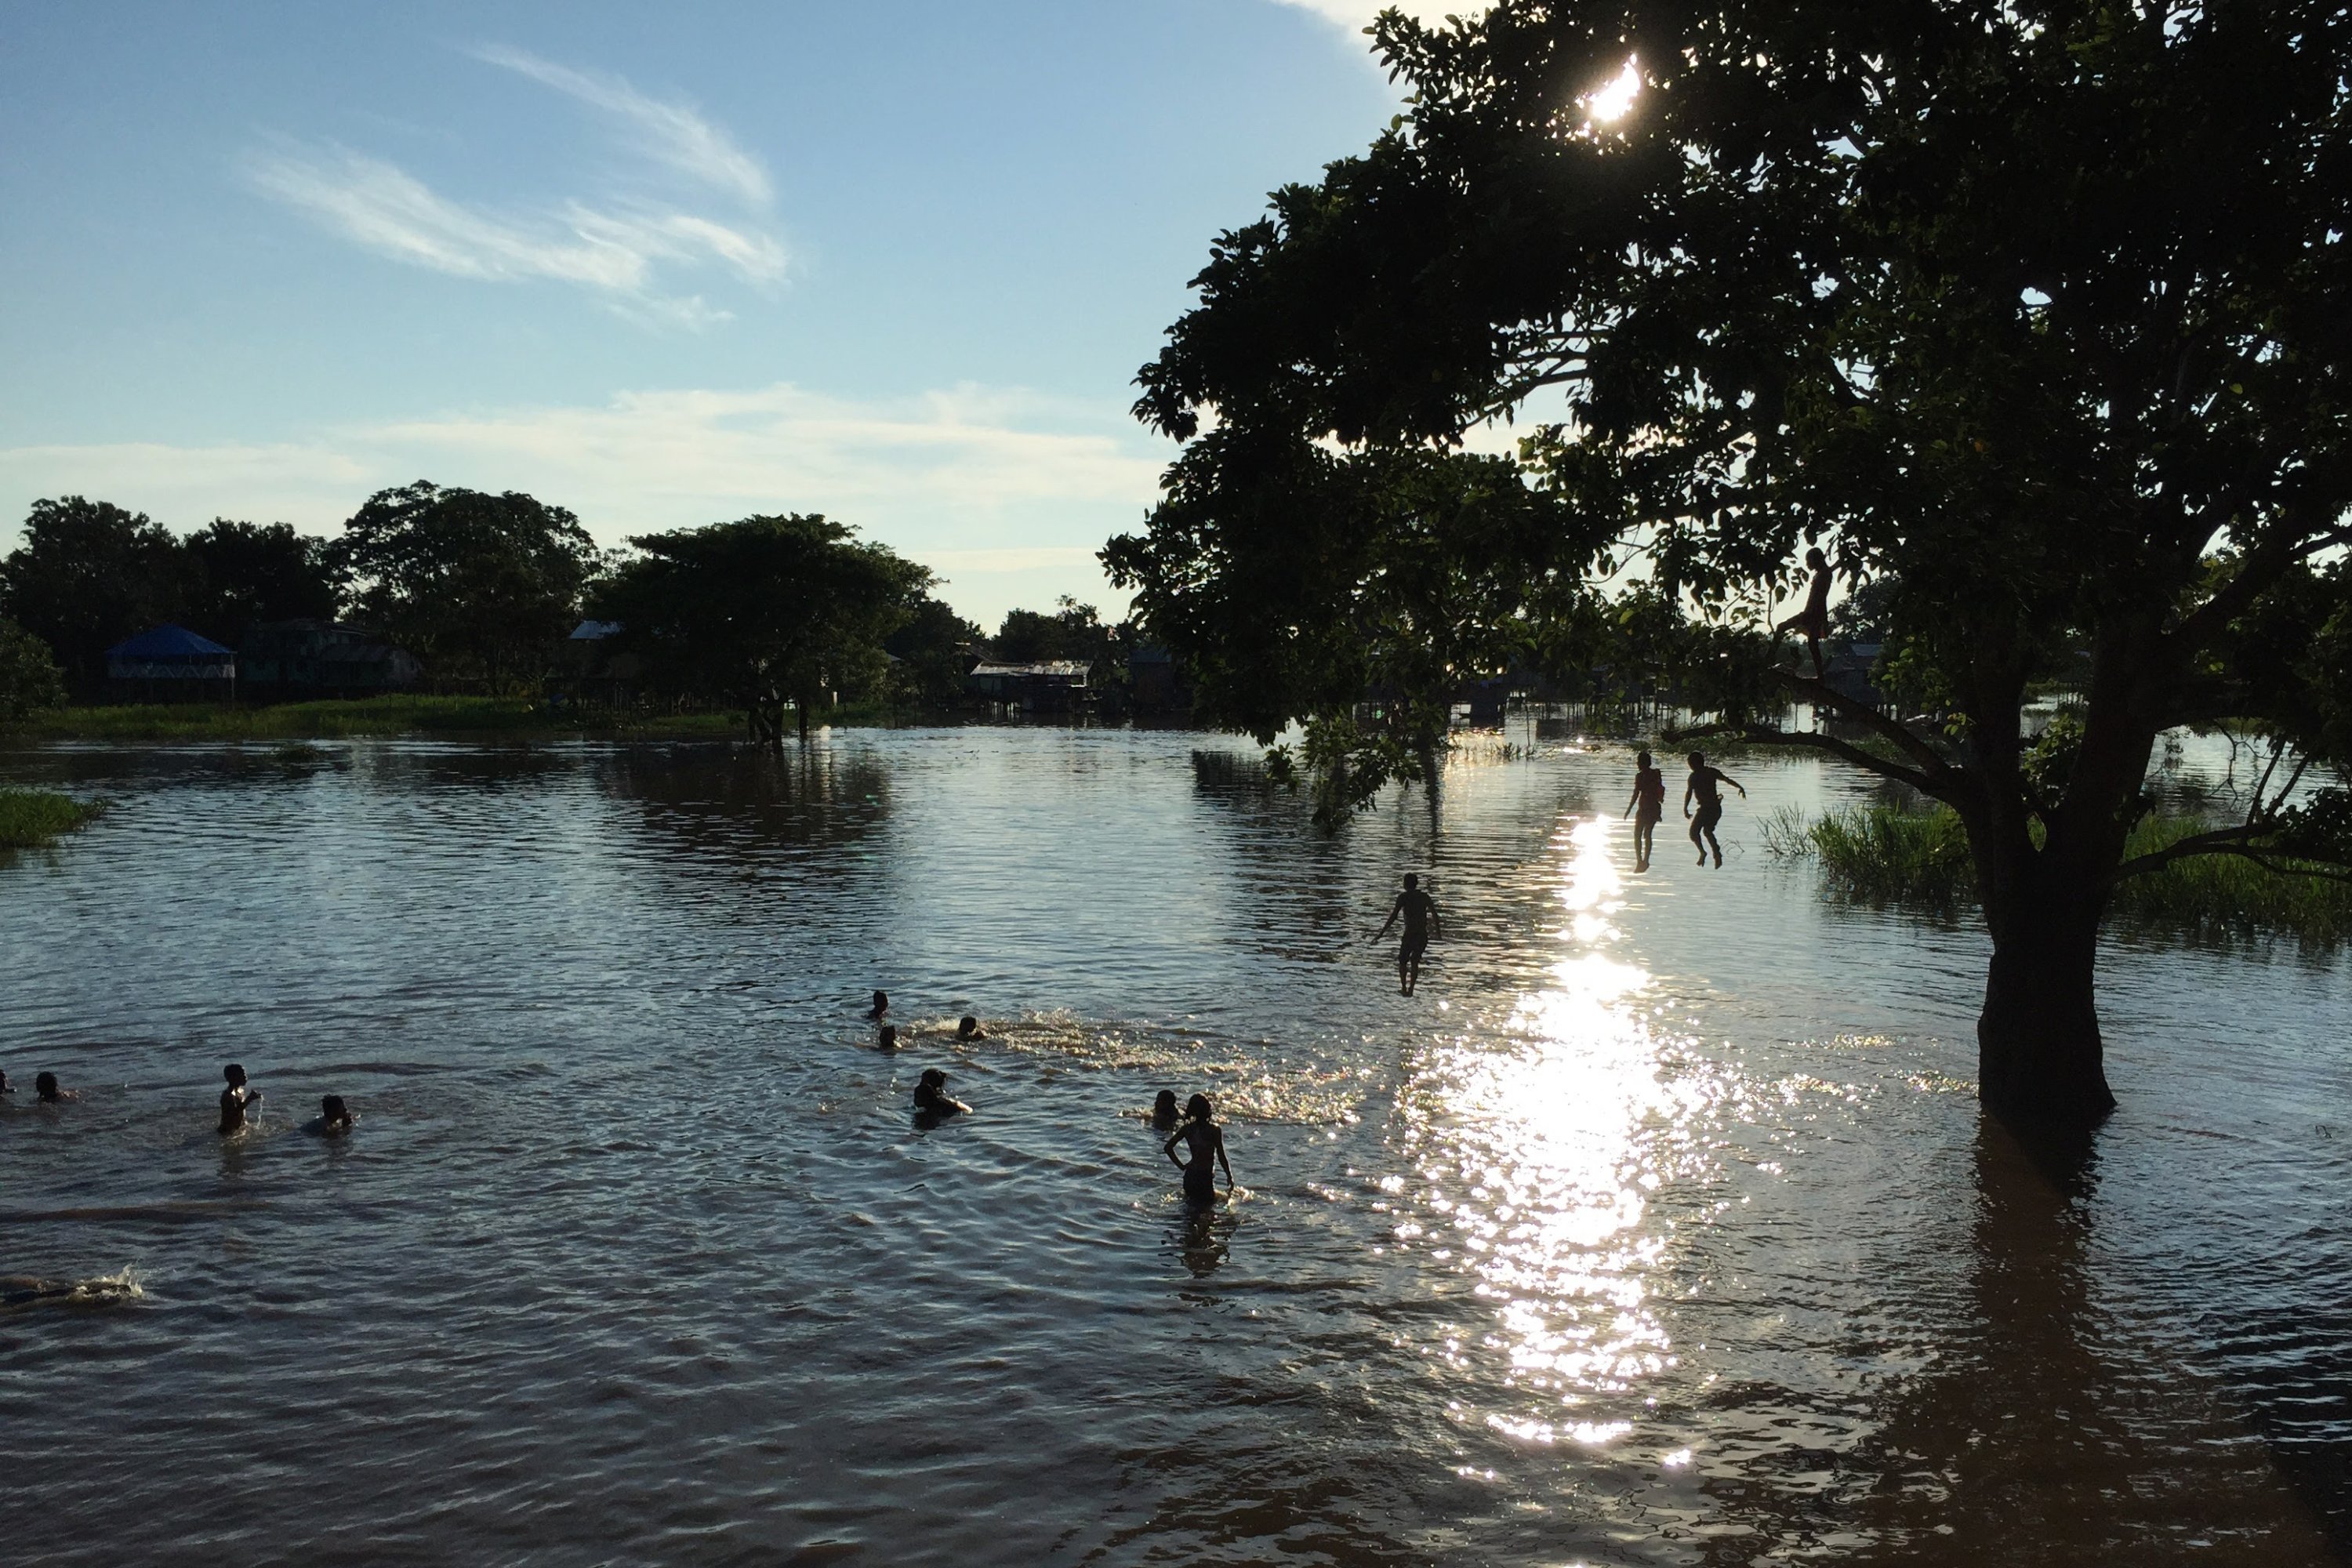 Children play in a flooded area of Leticia, Colombia, Feb. 14, 2017, located by the Amazon river, in the border with Brazil and Peru. (AP File Photo)